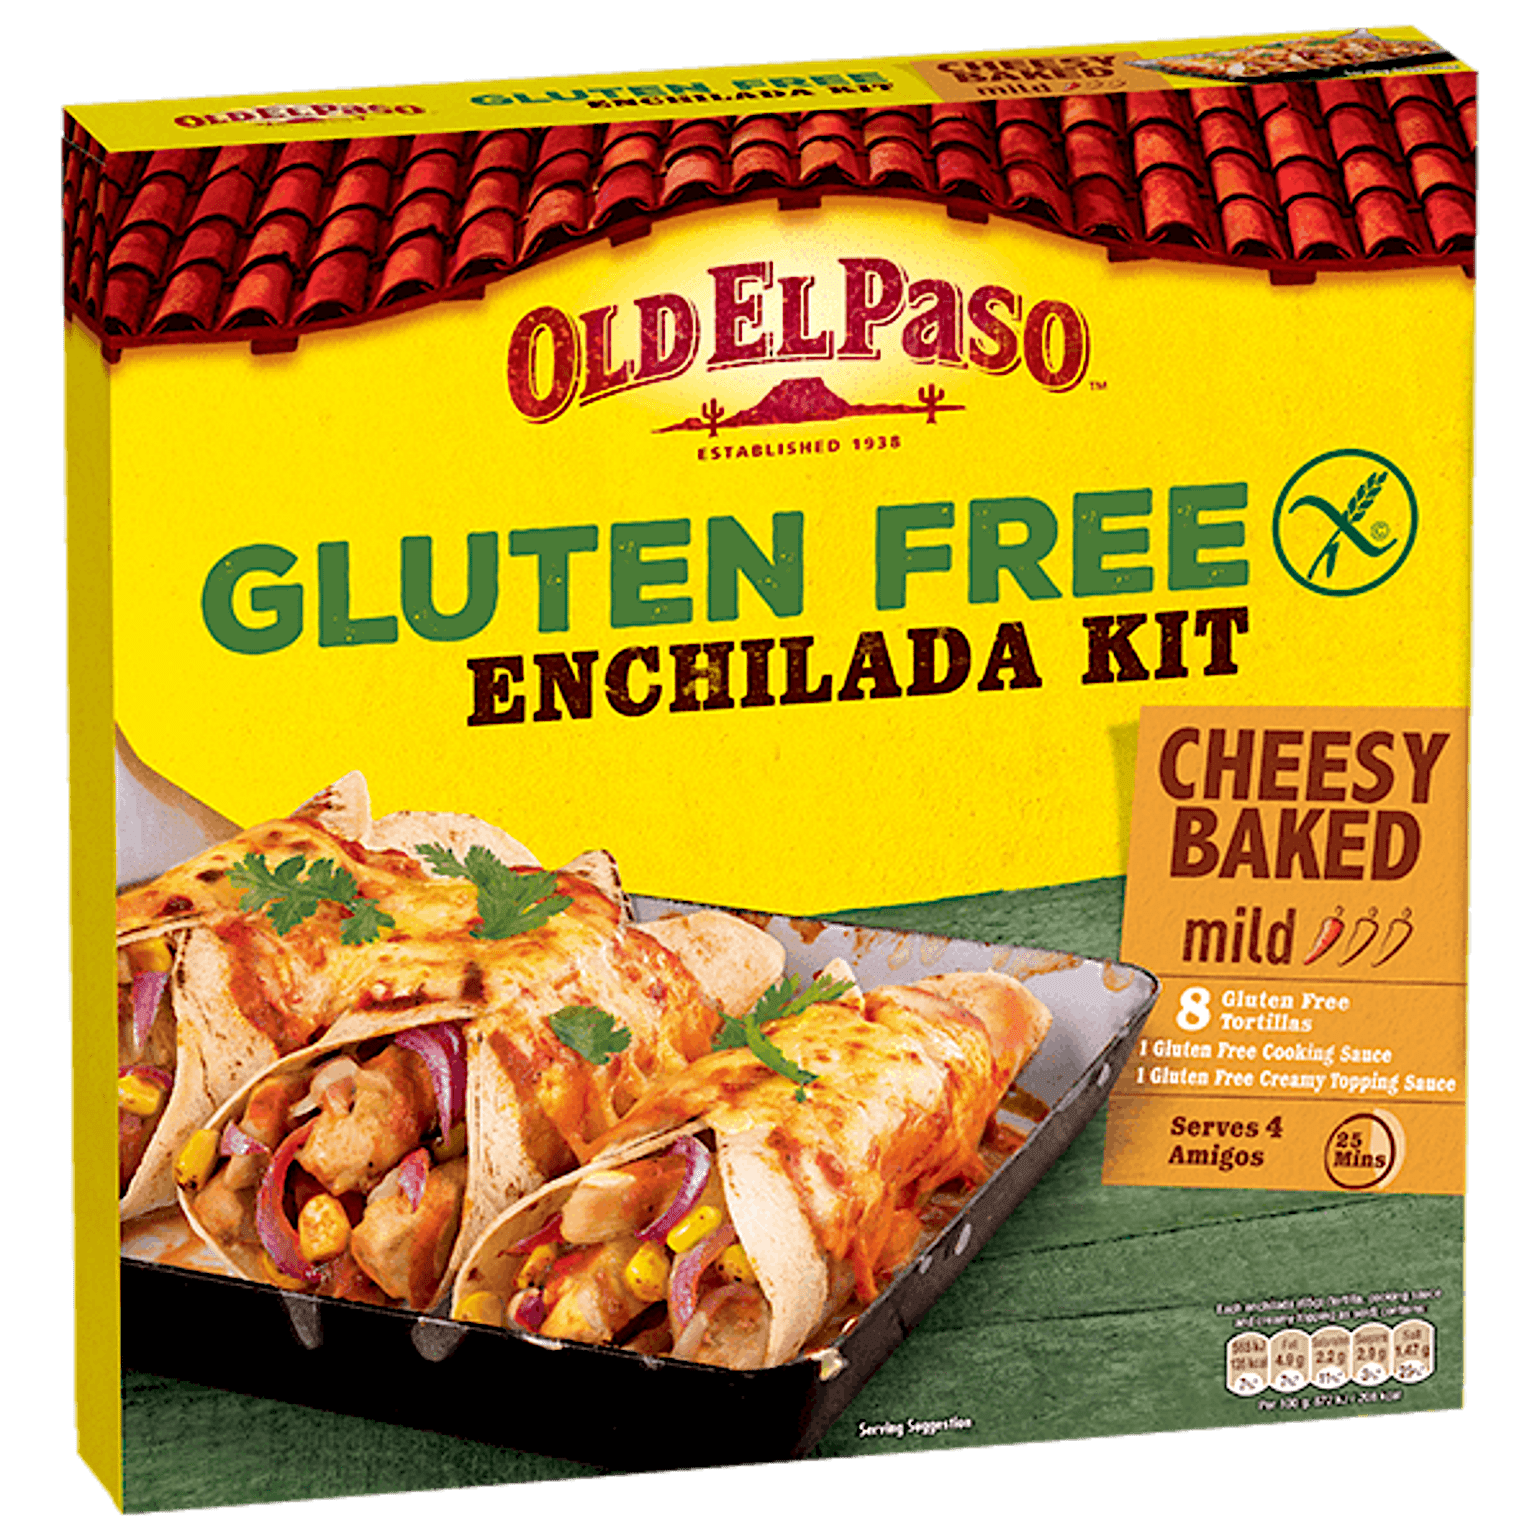 pack of Old El Paso's Gluten free cheesy baked enchilada kit containing tortillas, psice mix & creamy sauce (518g)